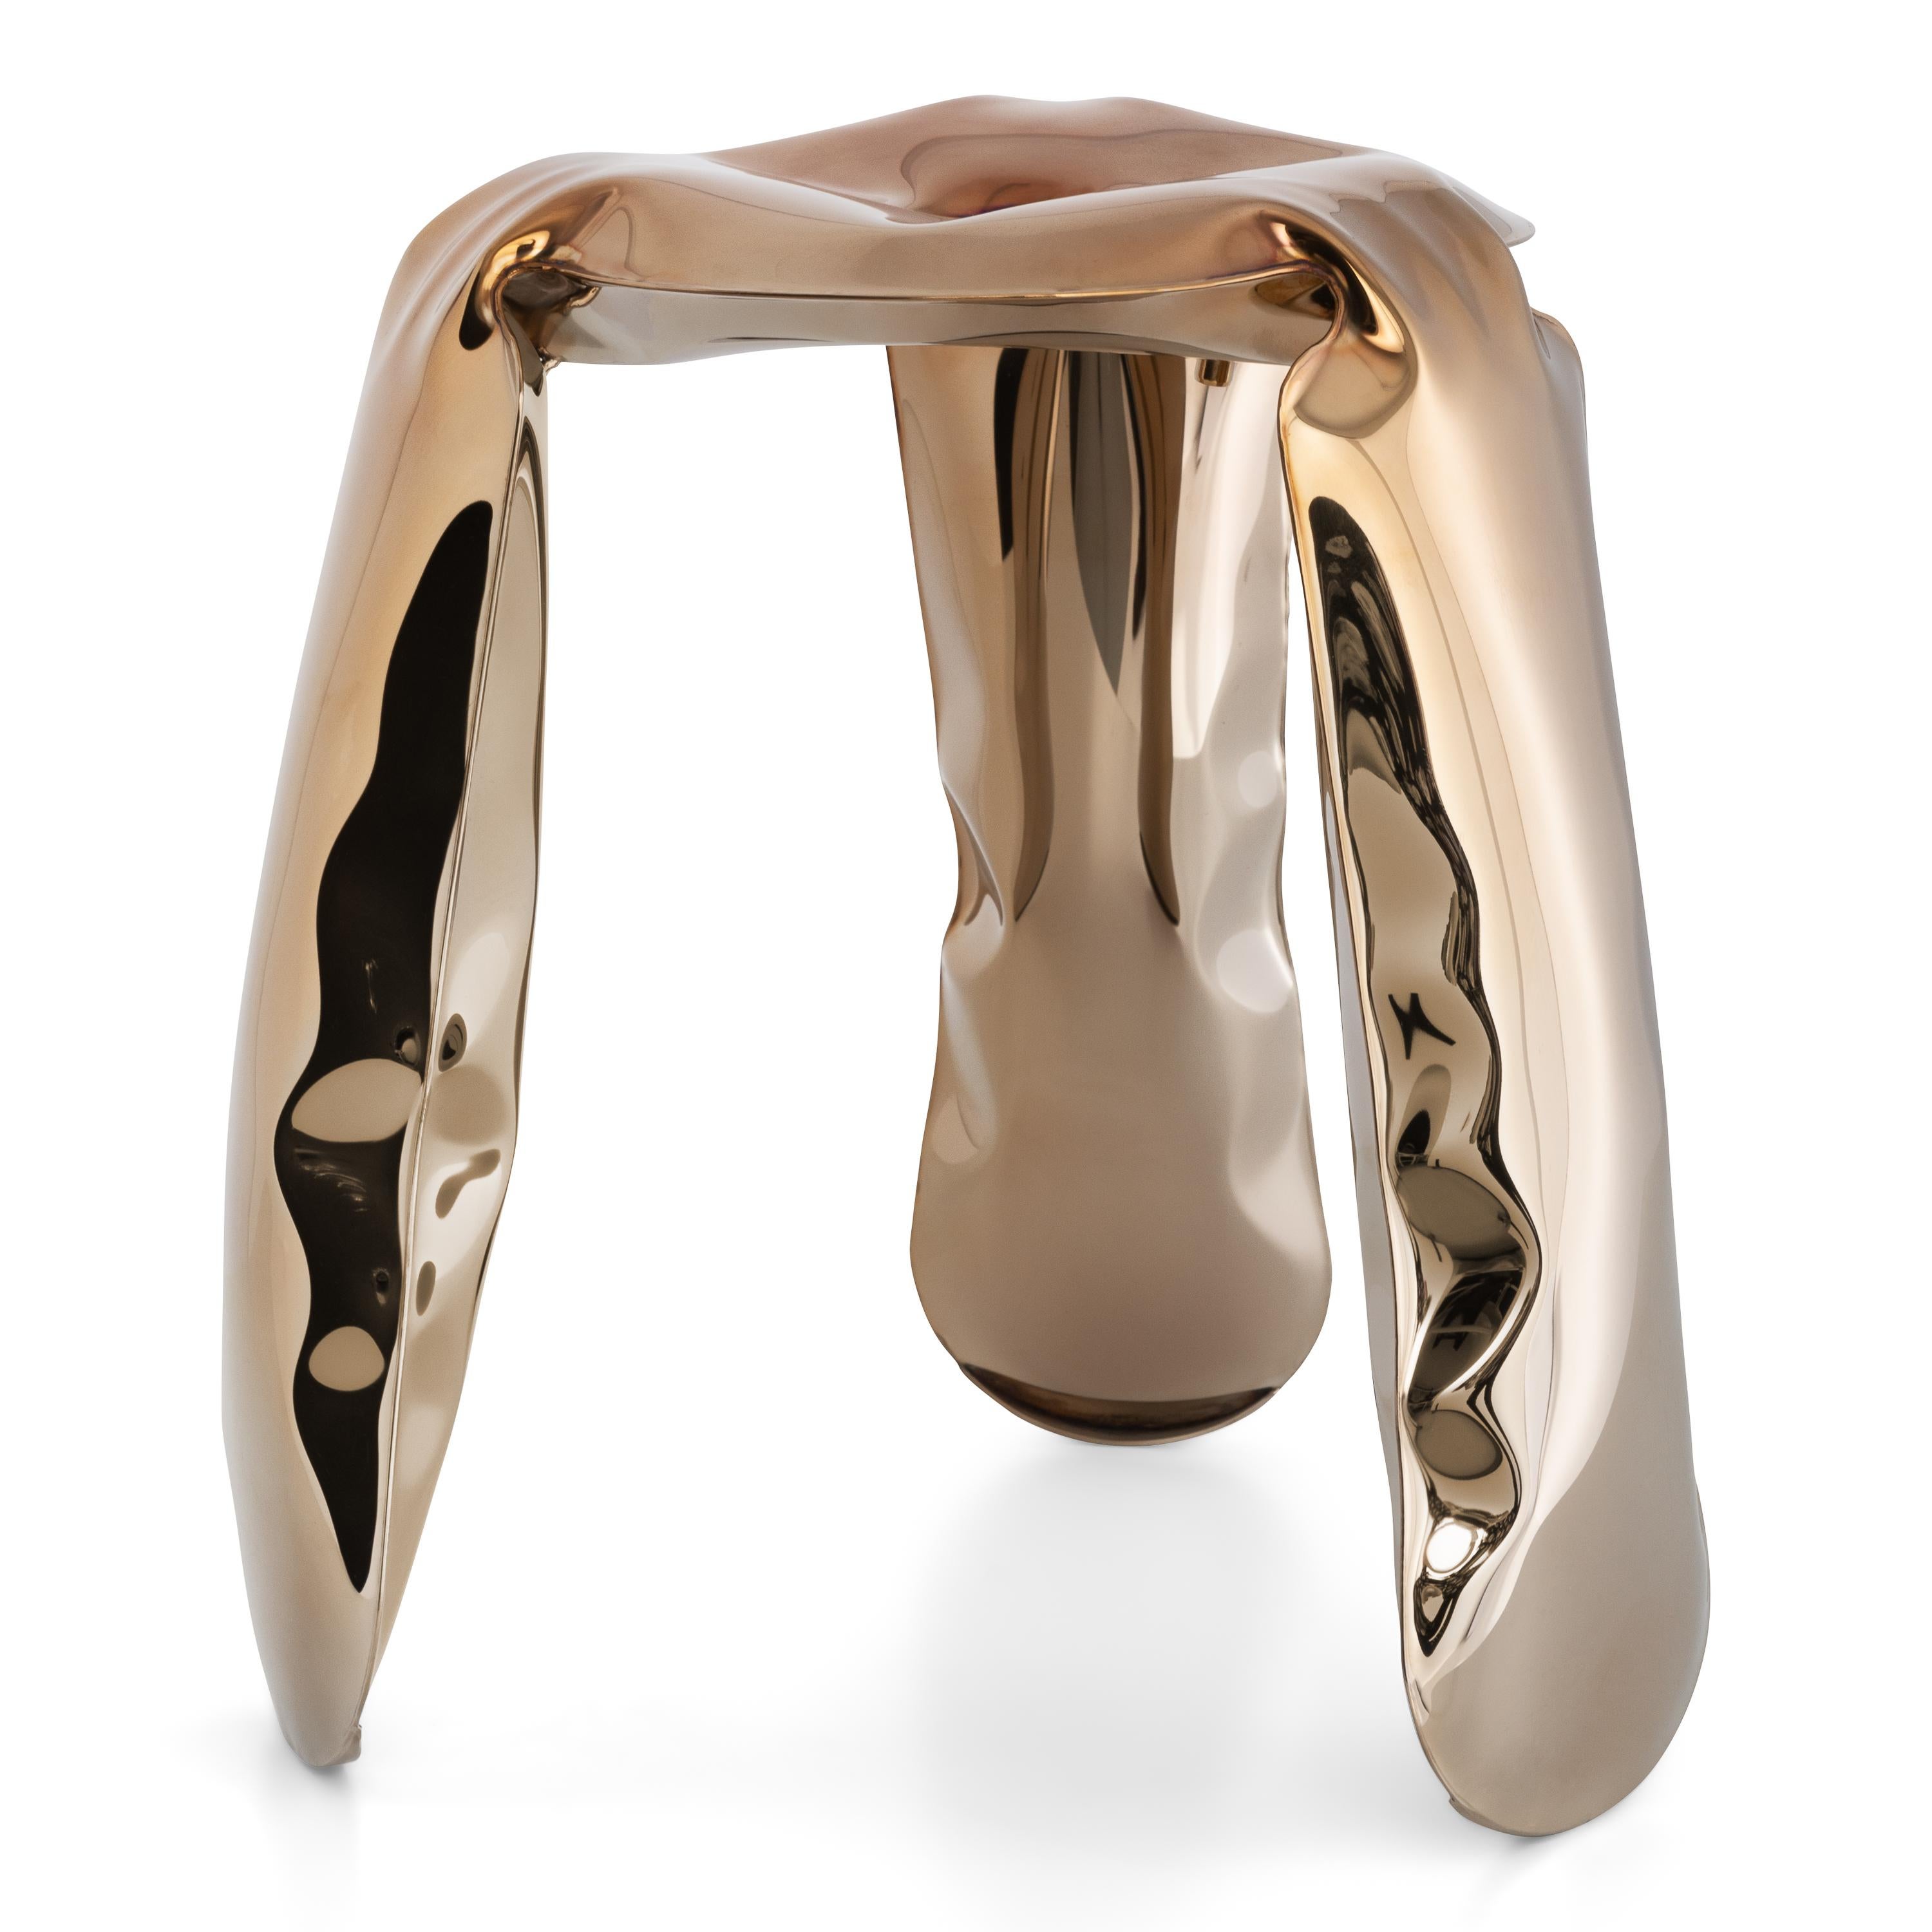 Flamed Gold Mini Plopp stool by Zieta
Dimensions: Diameter 25 x H 38 cm 
Material: Stainless Steel. Carbon Steel. 
Finish: Thermal colored. Flamed Gold. 
Available in colors: Flamed Gold and Deep Space Blue. Available in Stainless Steel,